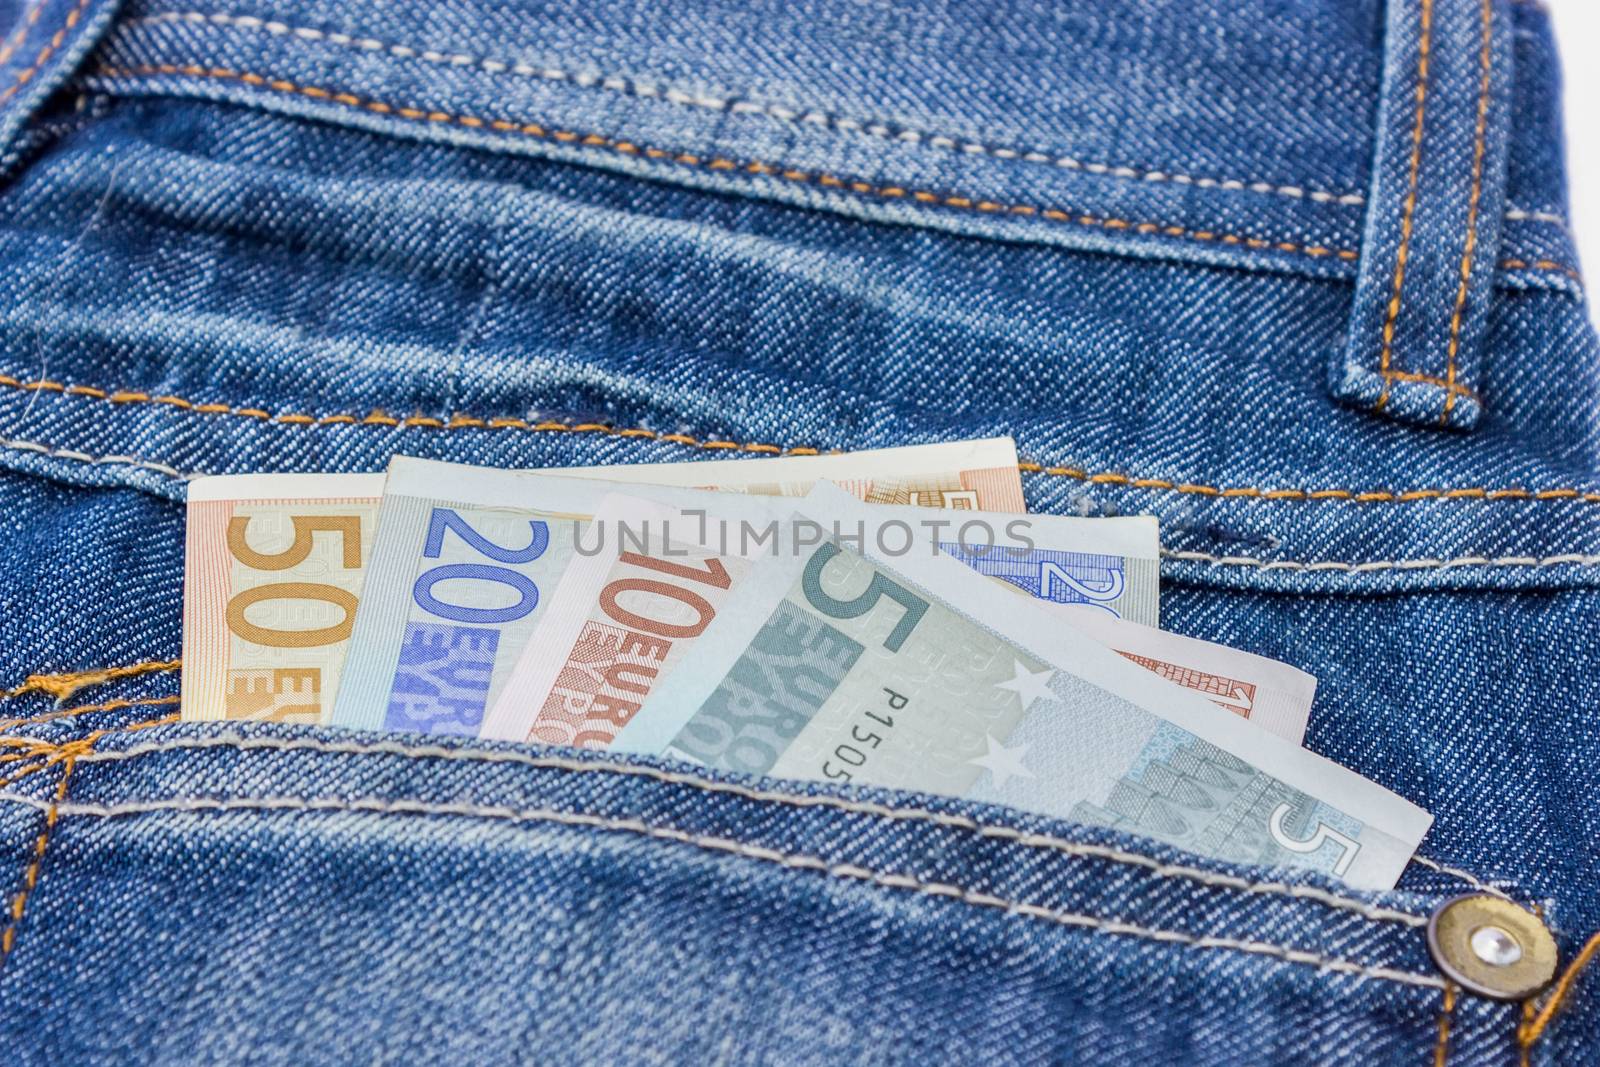 Jeans with euro notes in back pocket by BenSchonewille